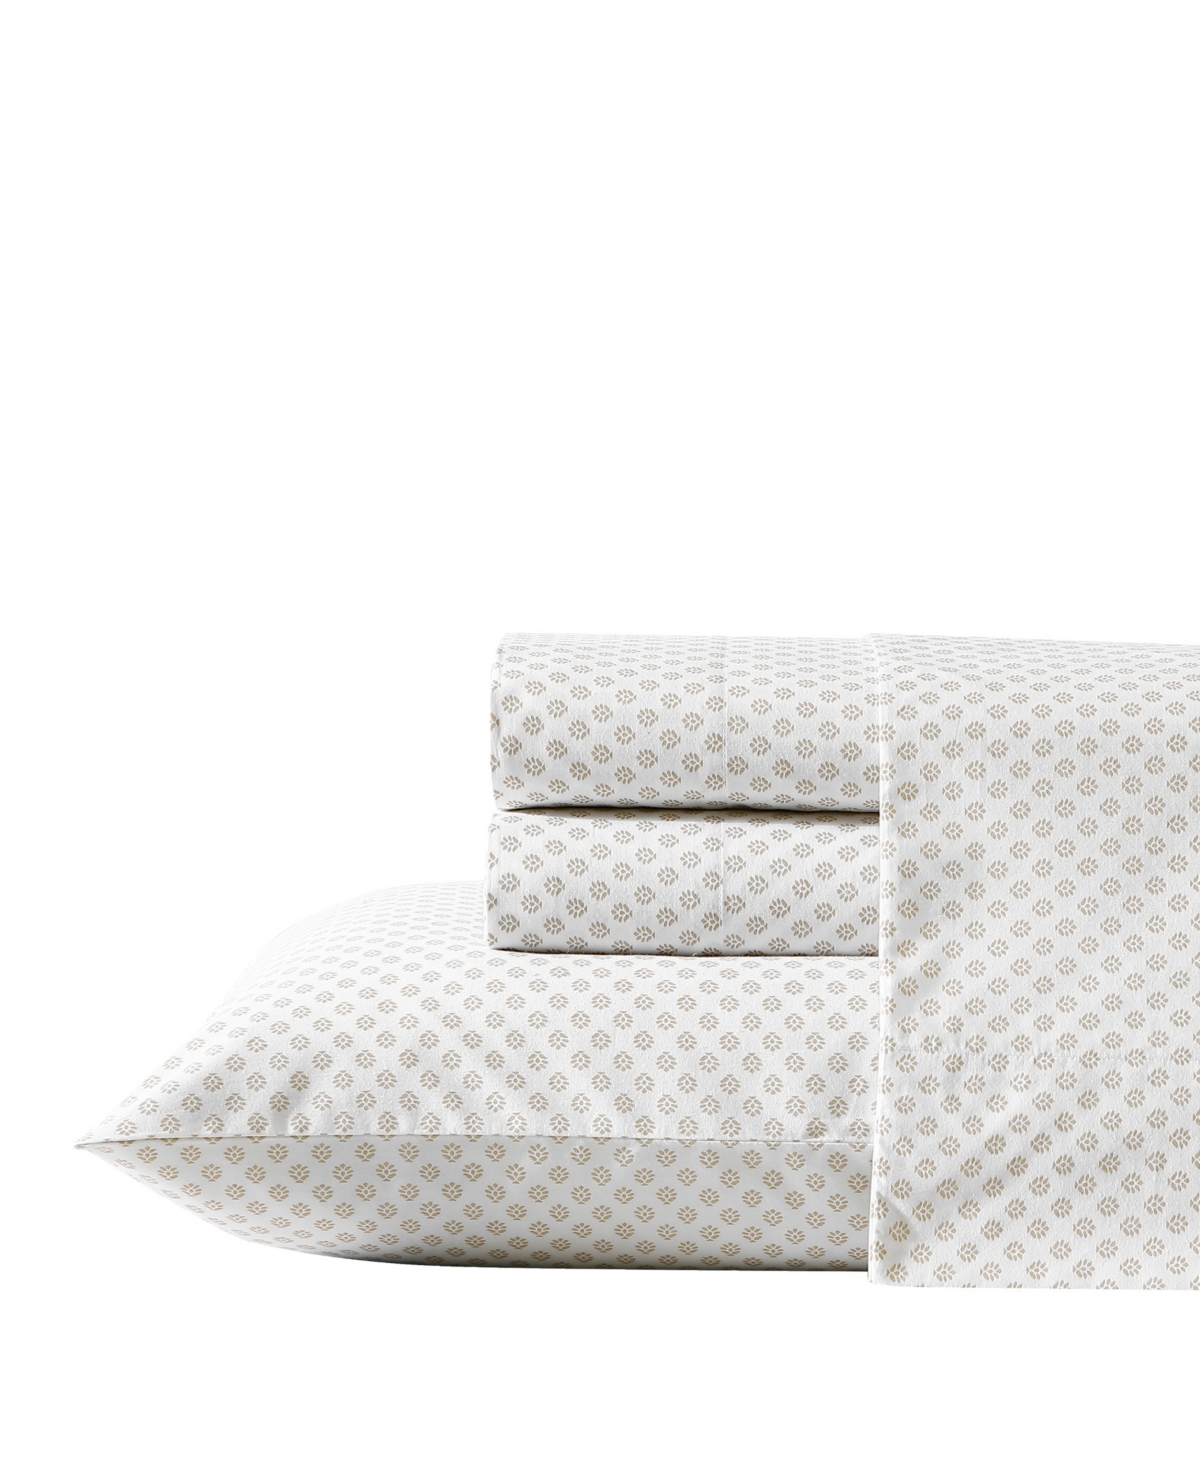 Stone Cottage Millstone Cotton Percale 4 Piece Sheet Set, Full In Beige